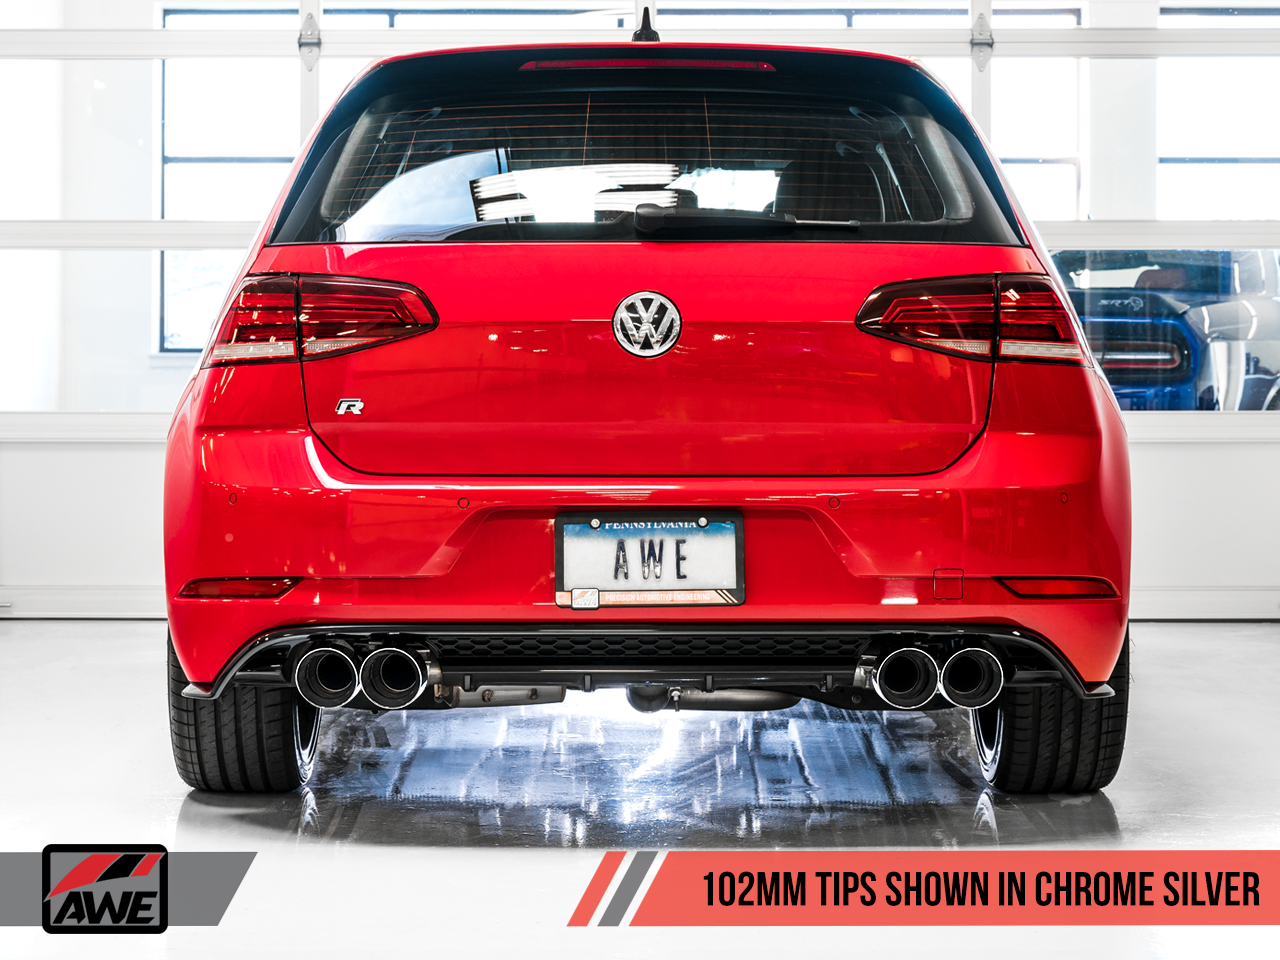 AWE SwitchPath™ Exhaust for MK7.5 Golf R - Motorsports LA